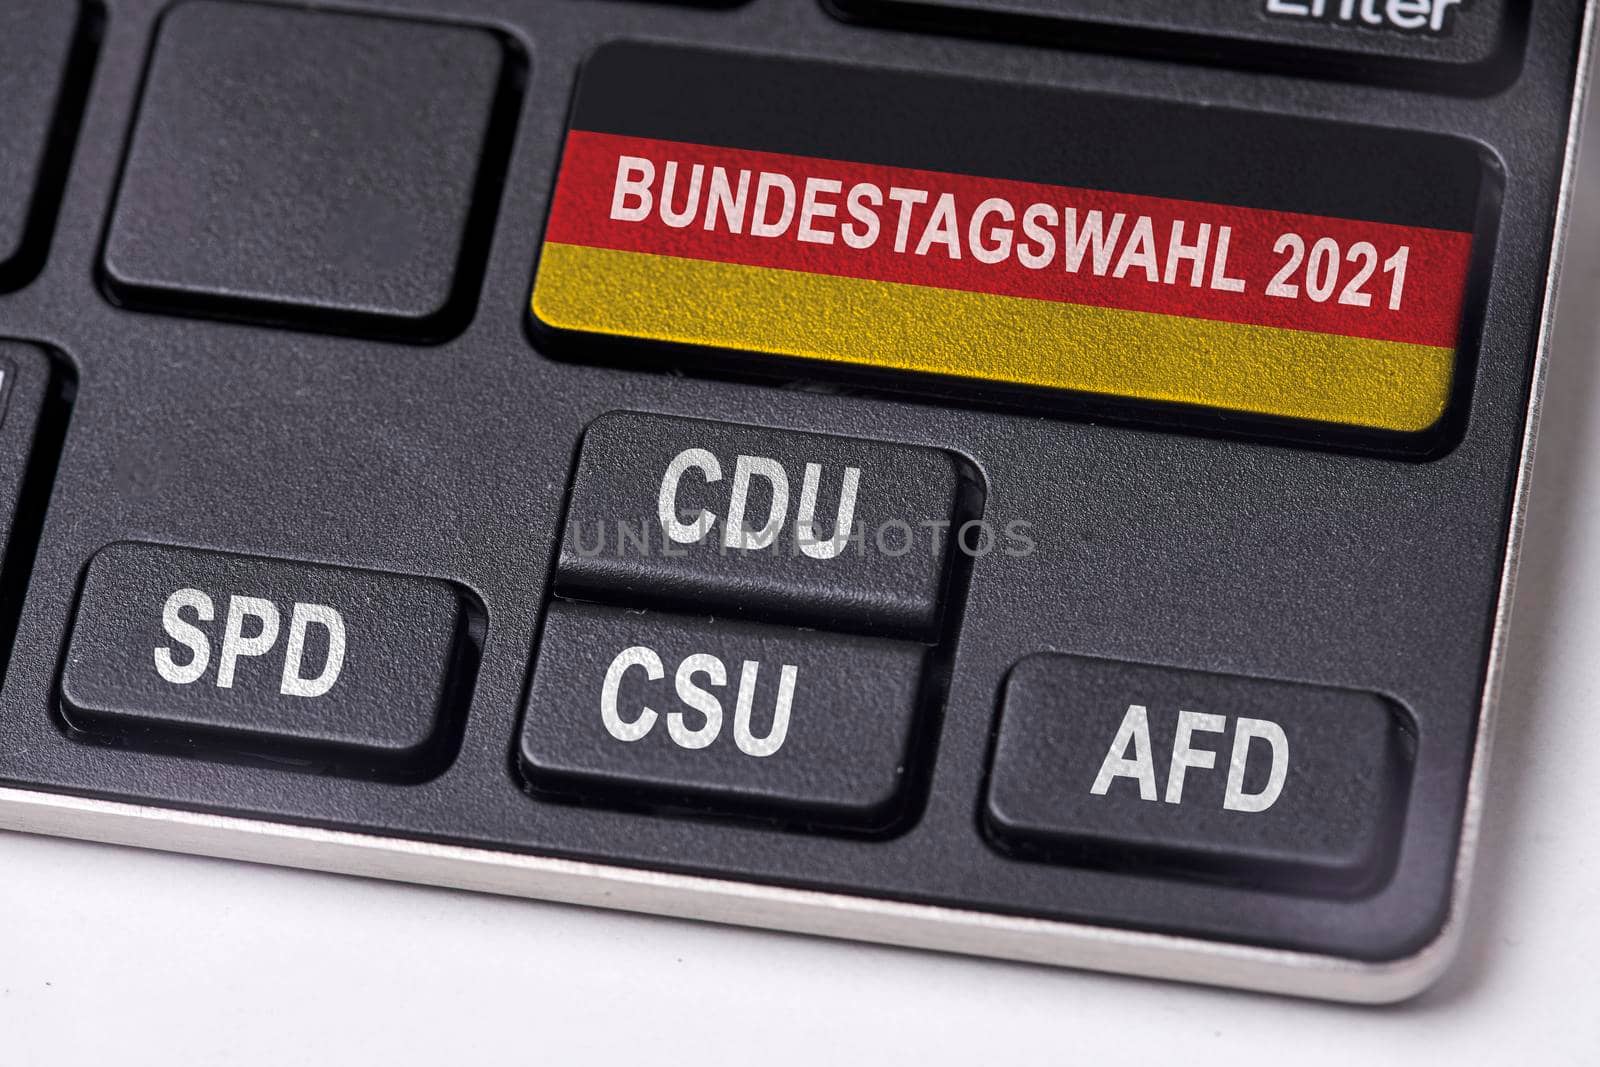 Bundestagswahl 2021. Germany Parliament Bundestag elections concept on keyboard with most popular political parties - CDU, SPD, CSU and AFD